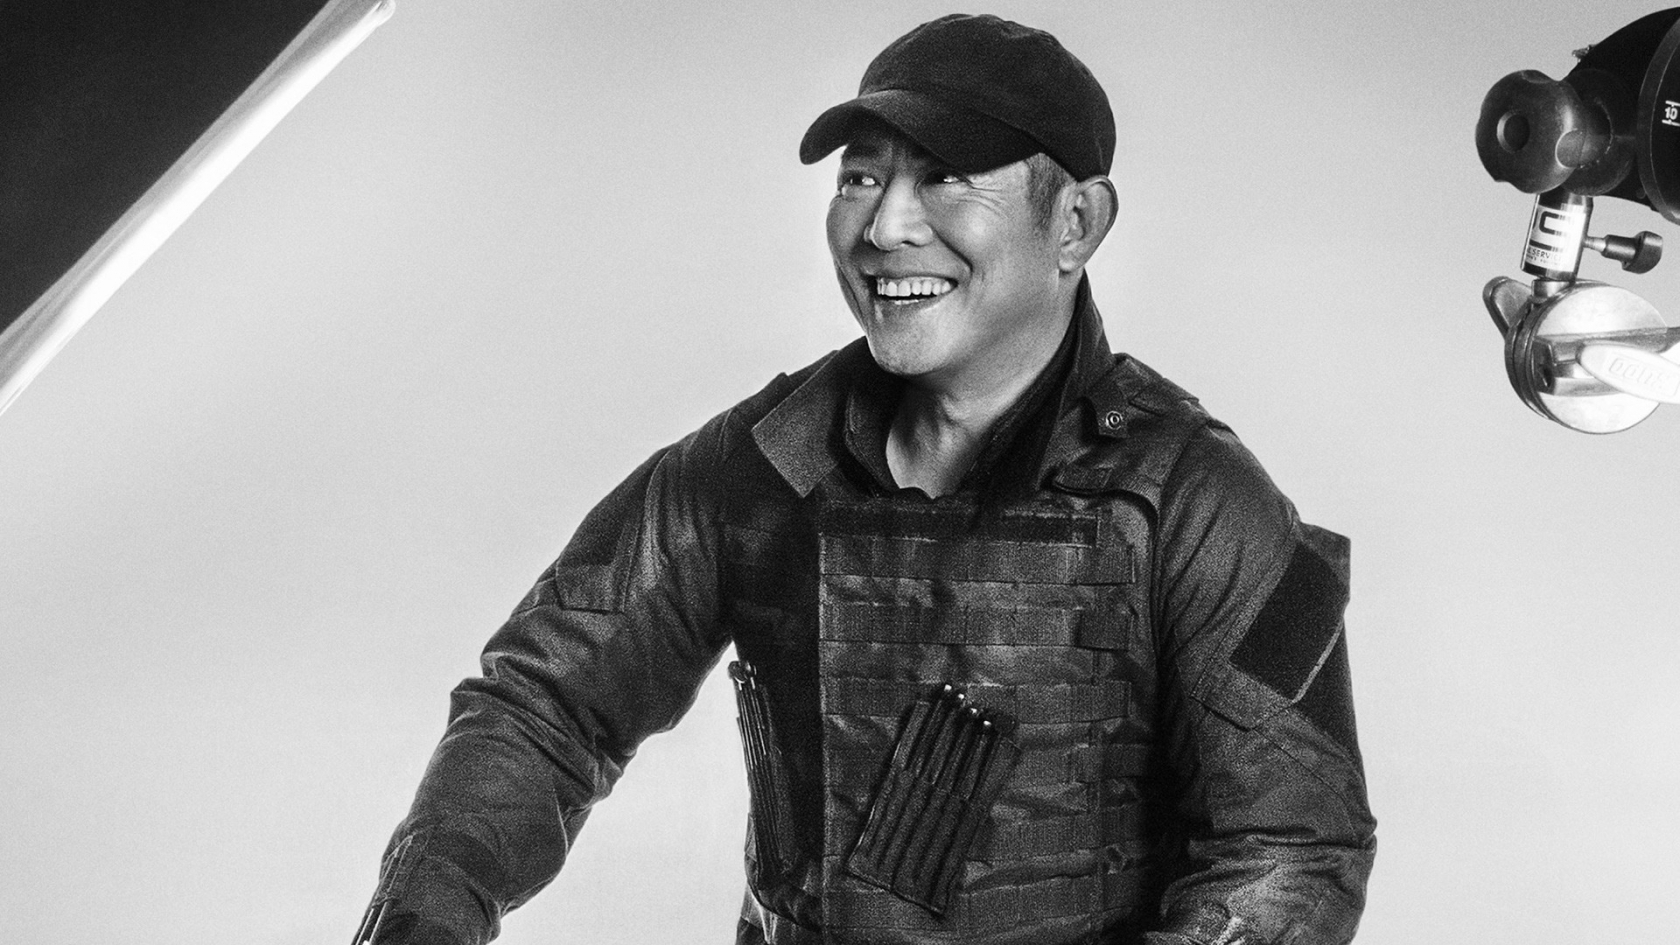 Jet Li The Expendables 3 for 1680 x 945 HDTV resolution